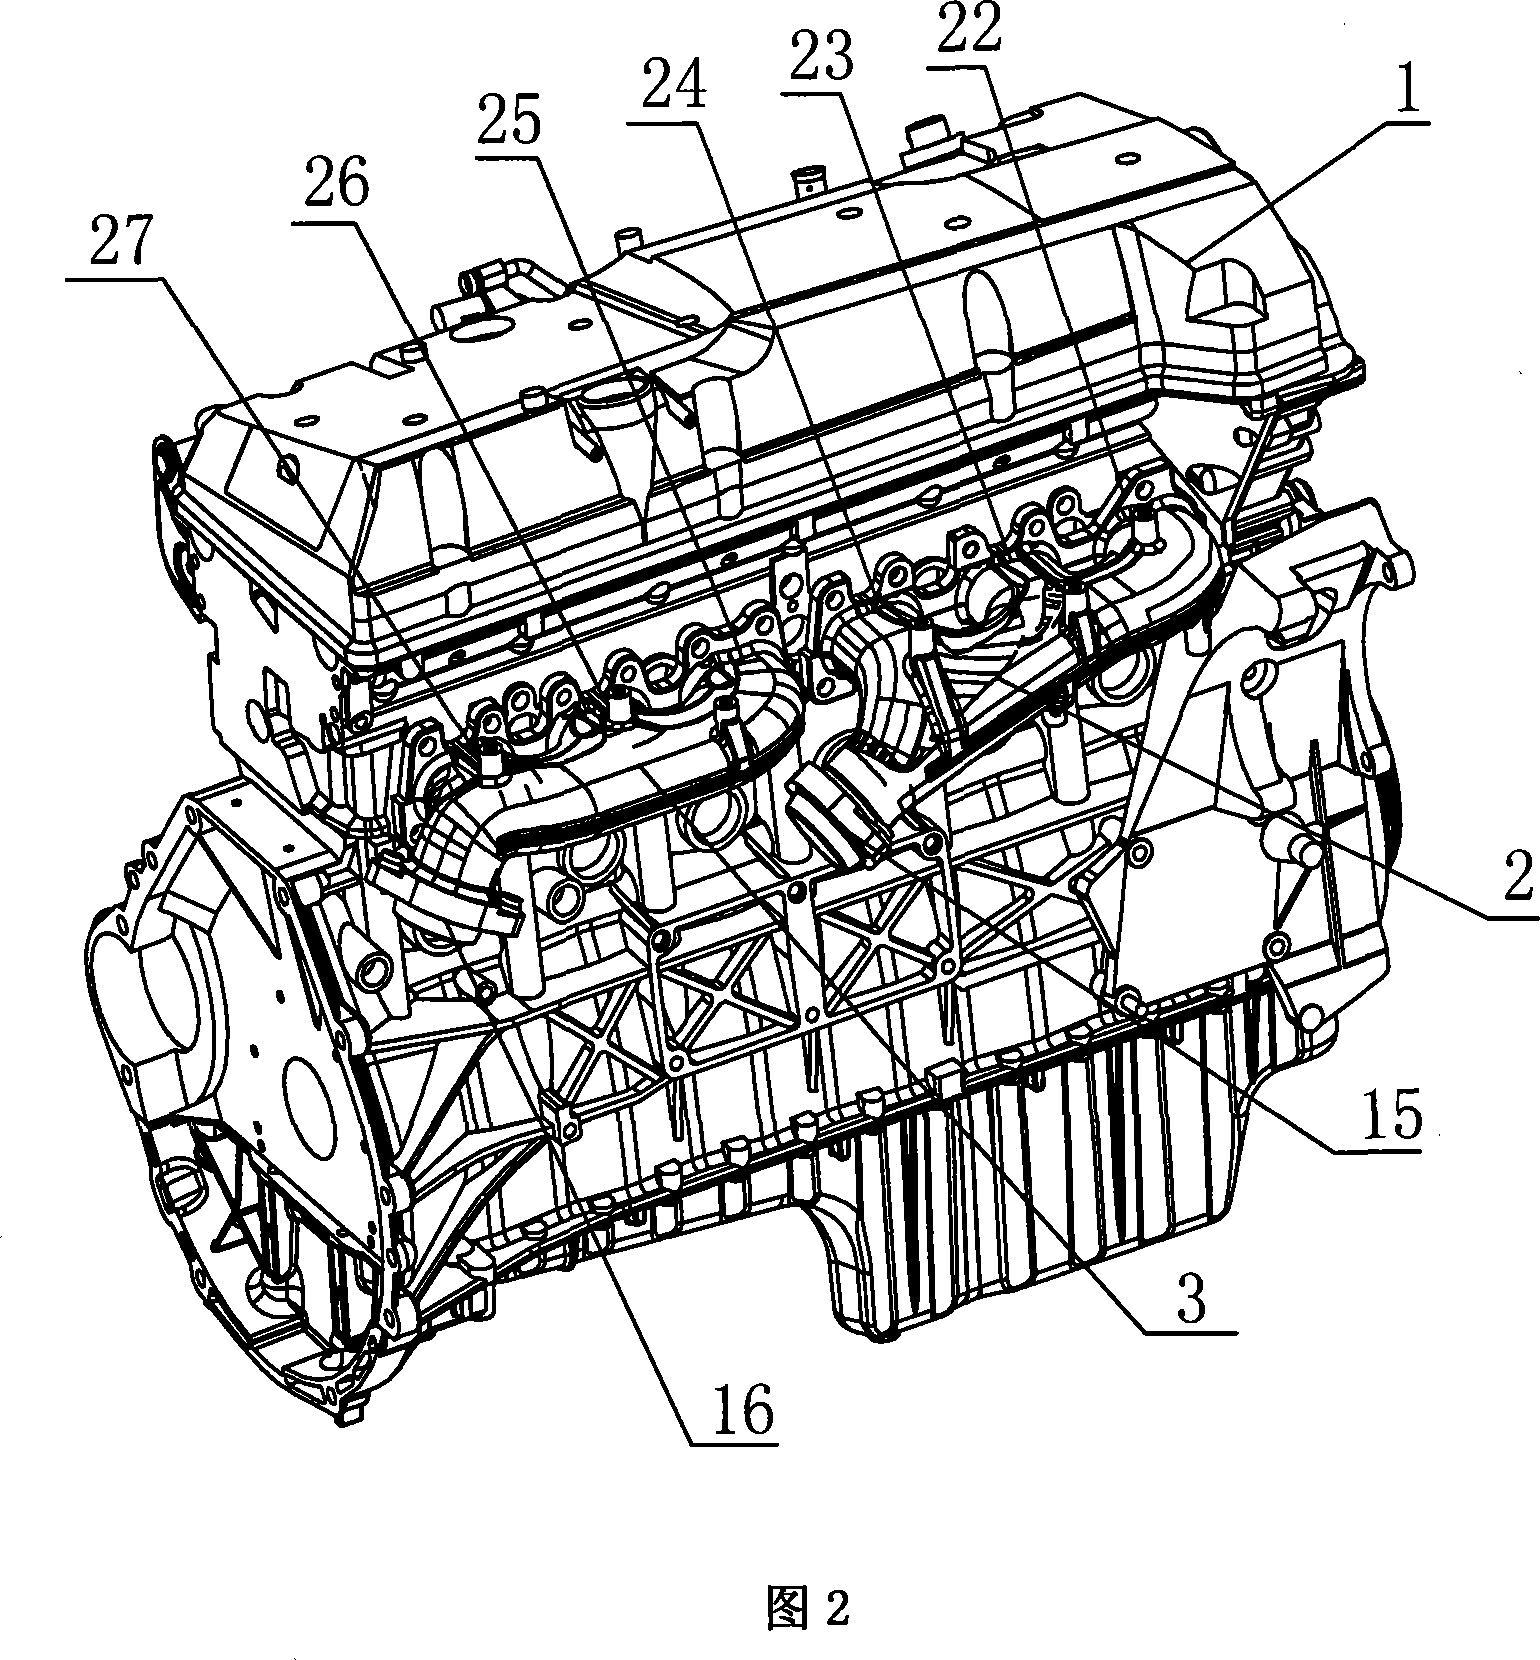 Straight six-cylinder car engine exhausting pipe system